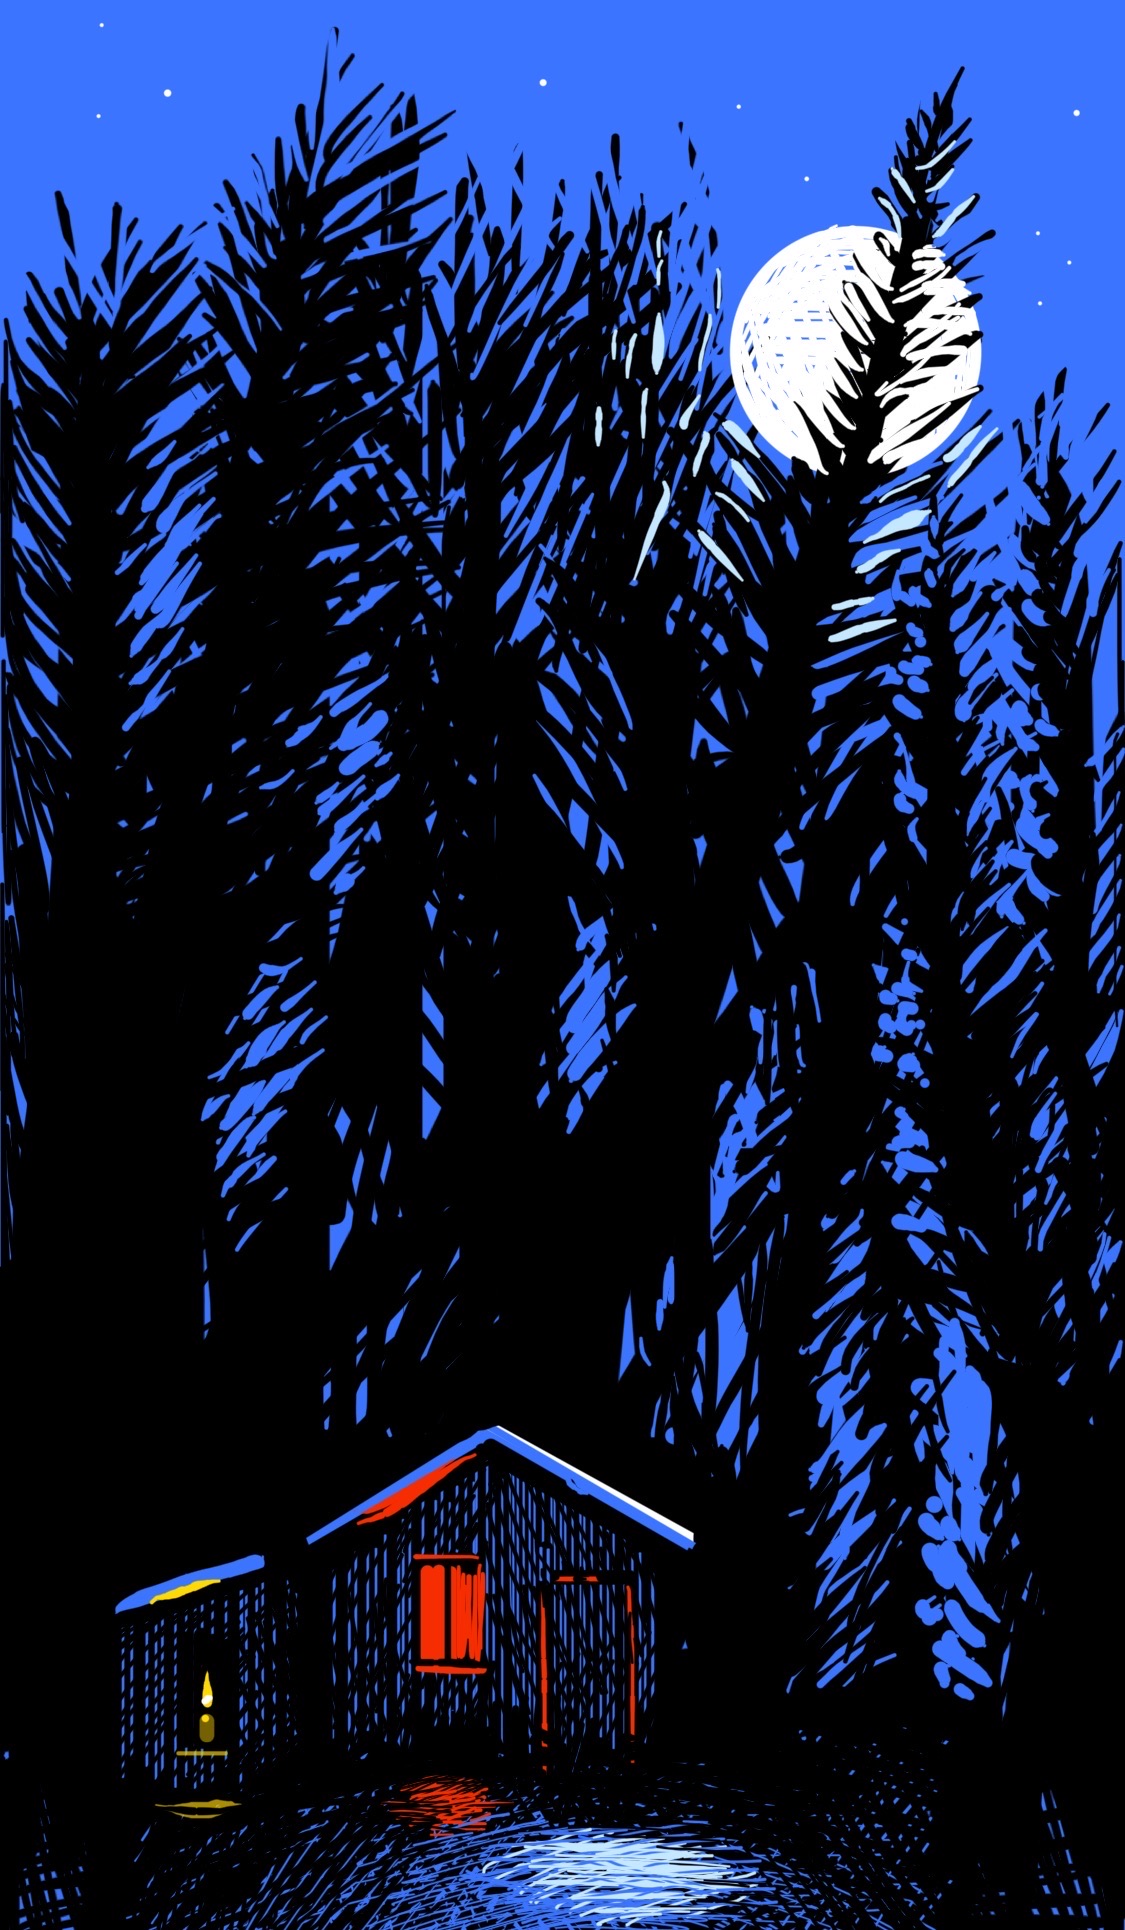 A tiny cabin nestled in the vast black woods at night, illuminated by a full moon.